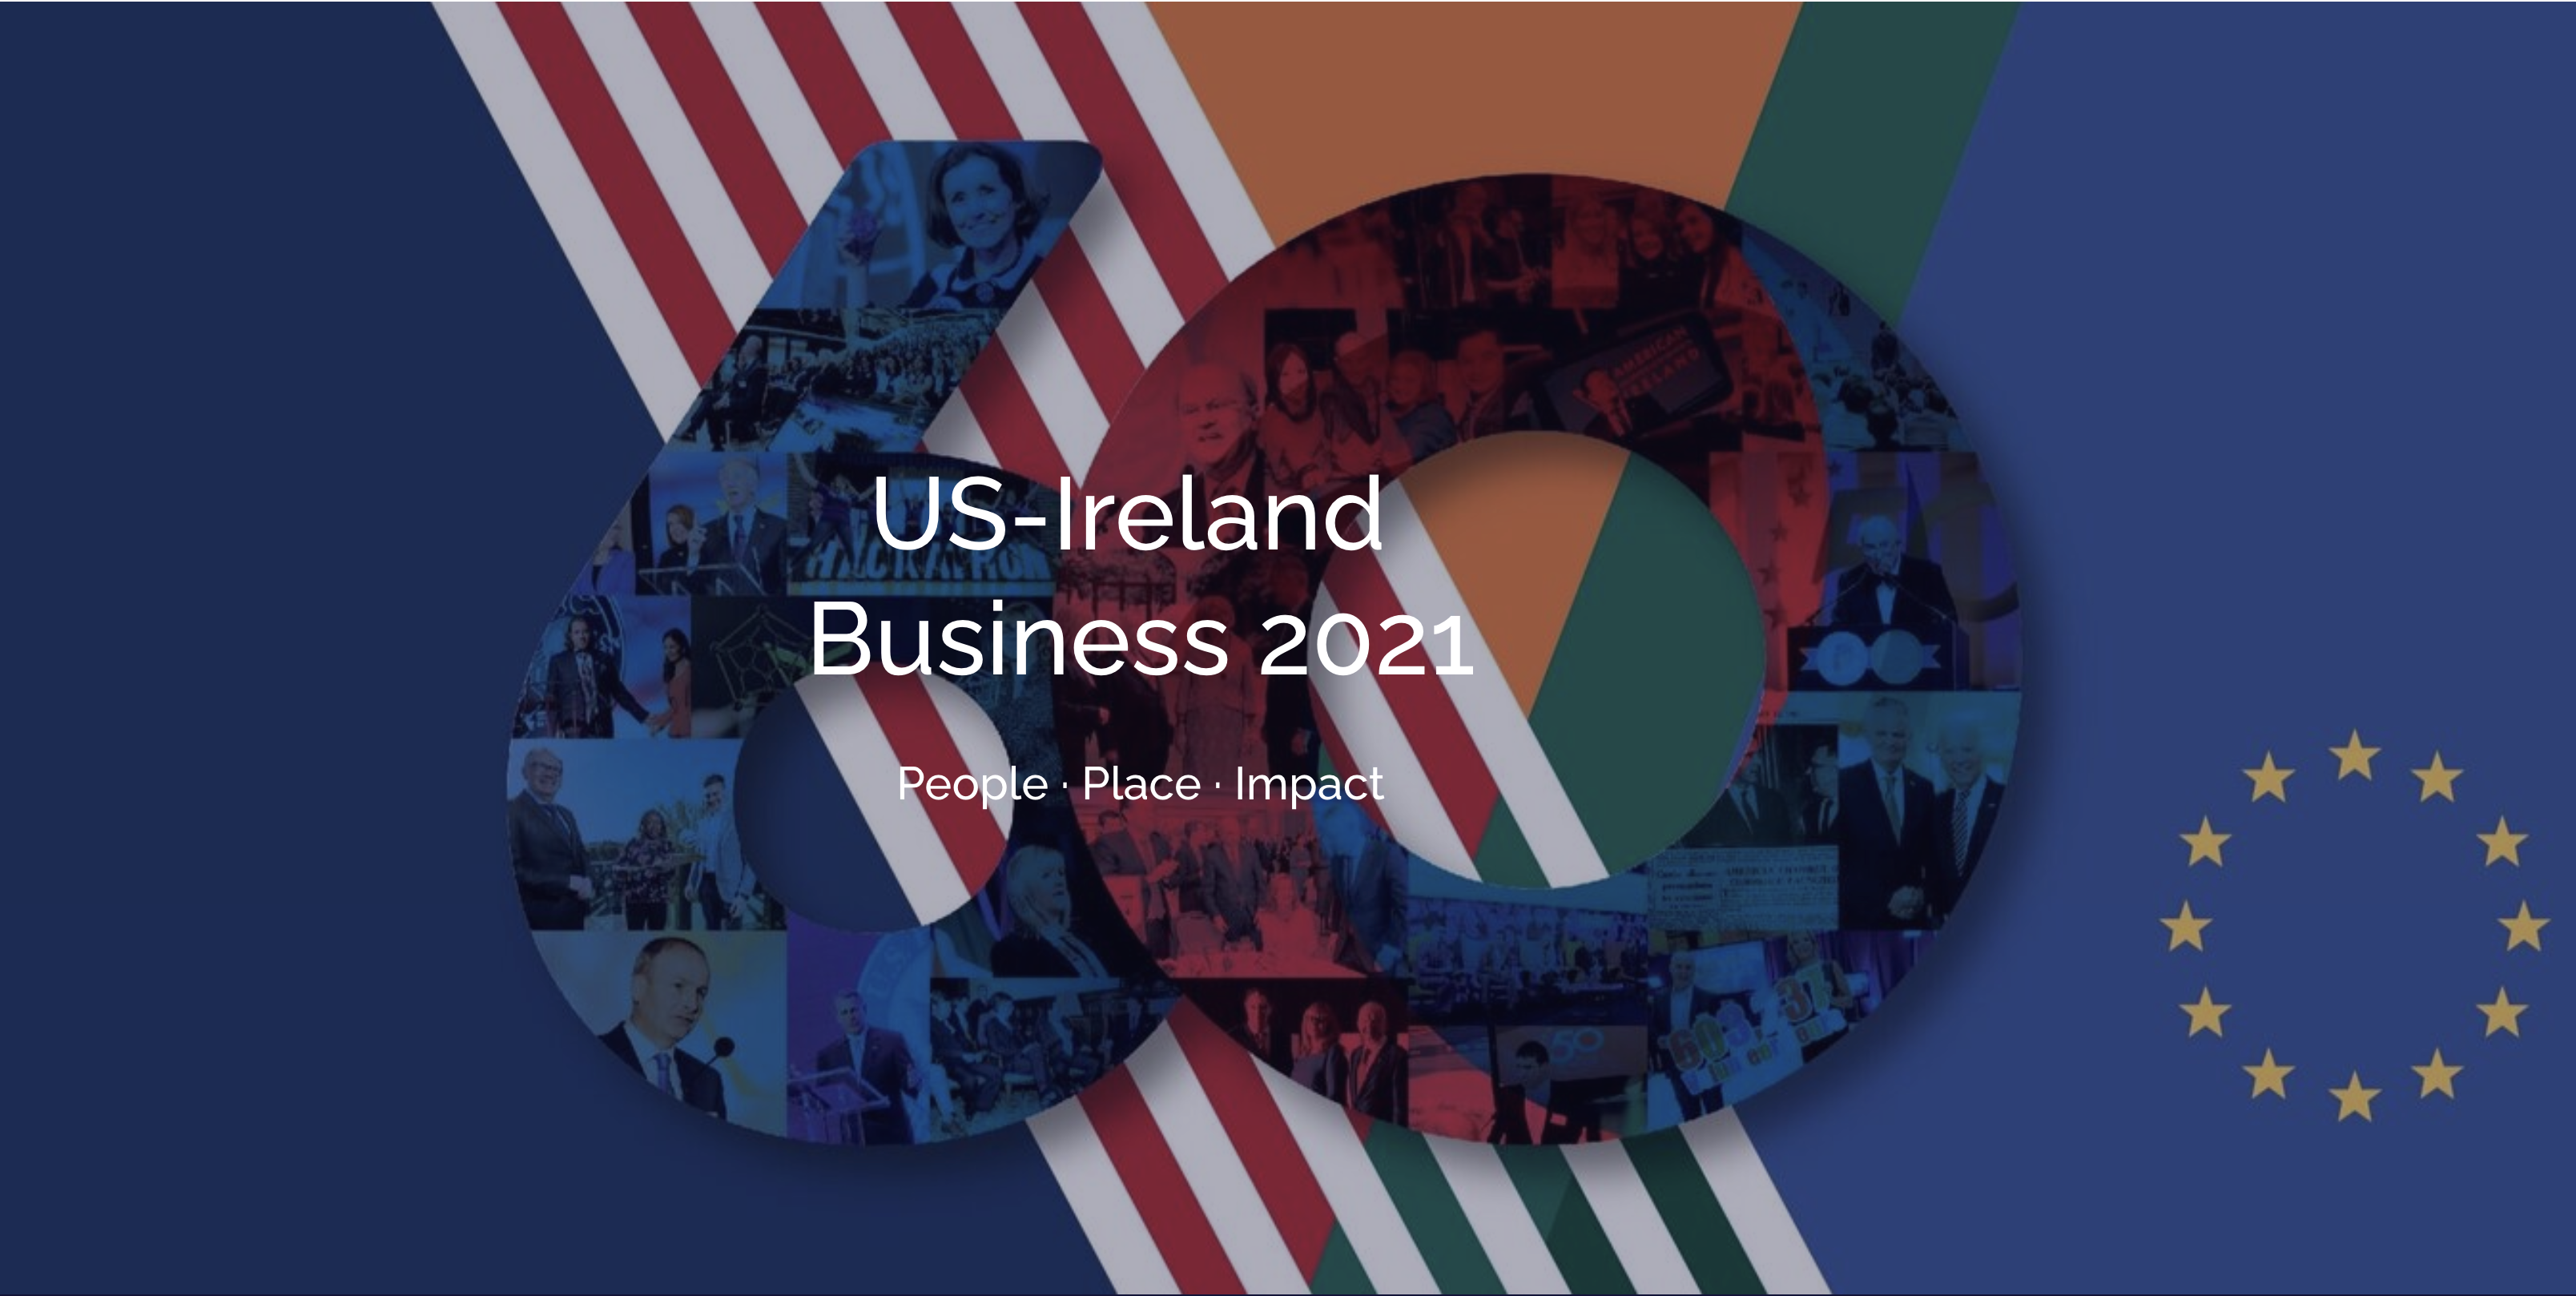 Virtual Launch of the American Chamber of Commerce Ireland, US-Ireland Business Report 2021